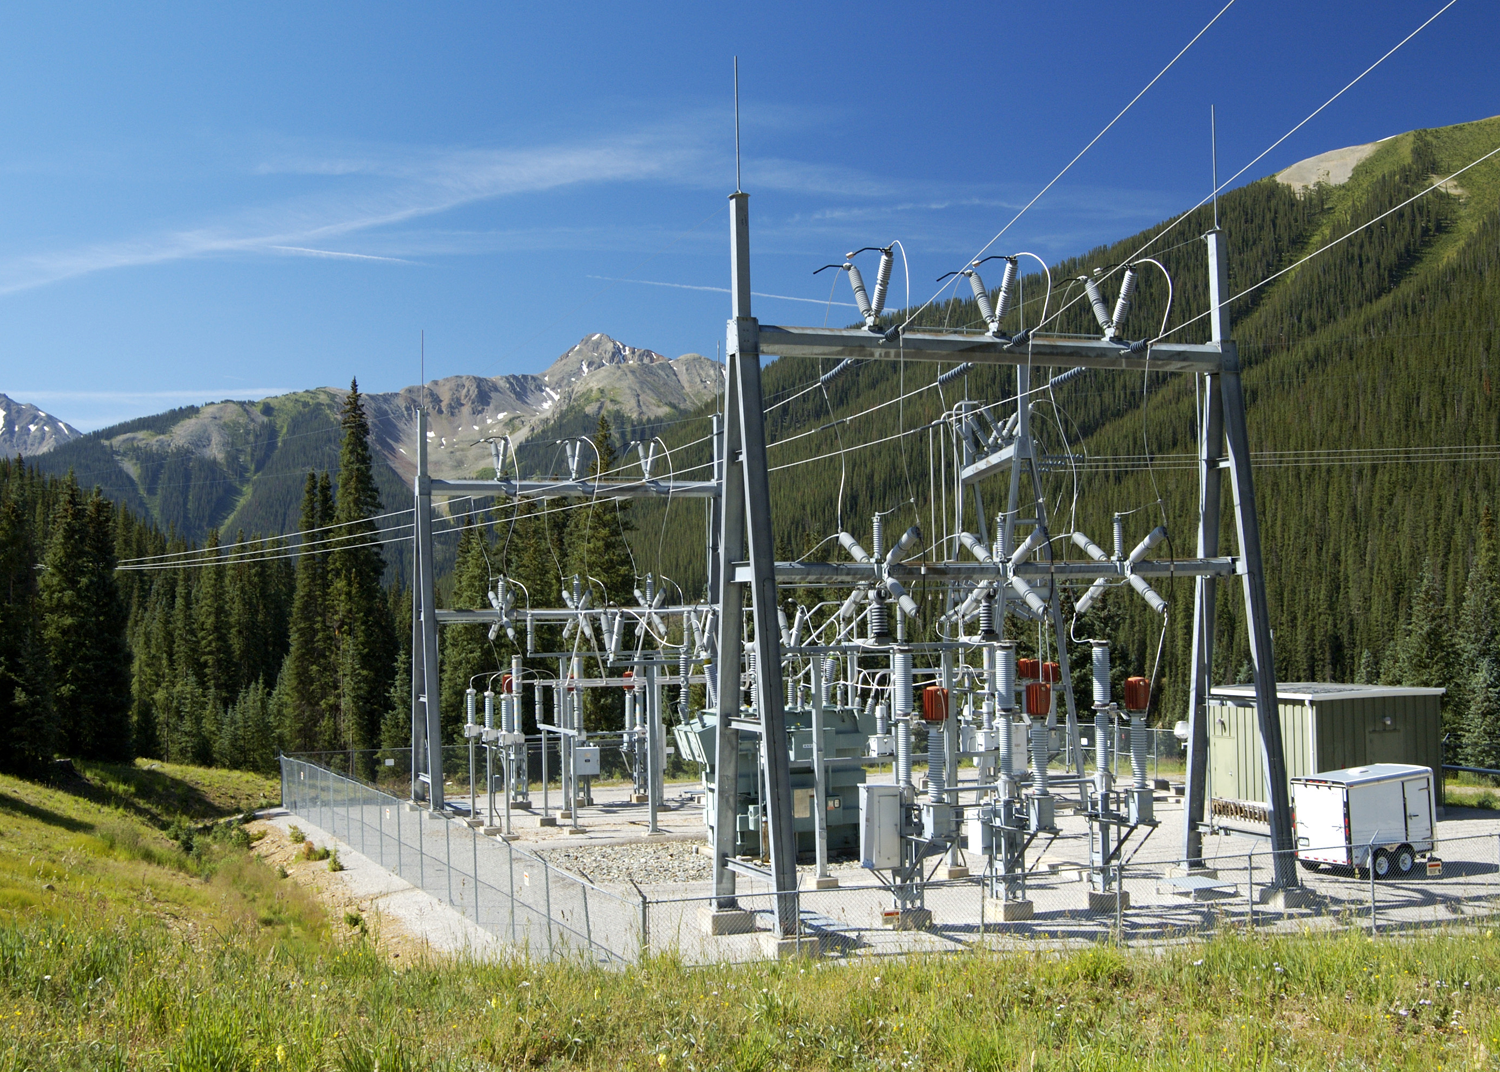 Now, it’s easier to adopt SDN for substation networking